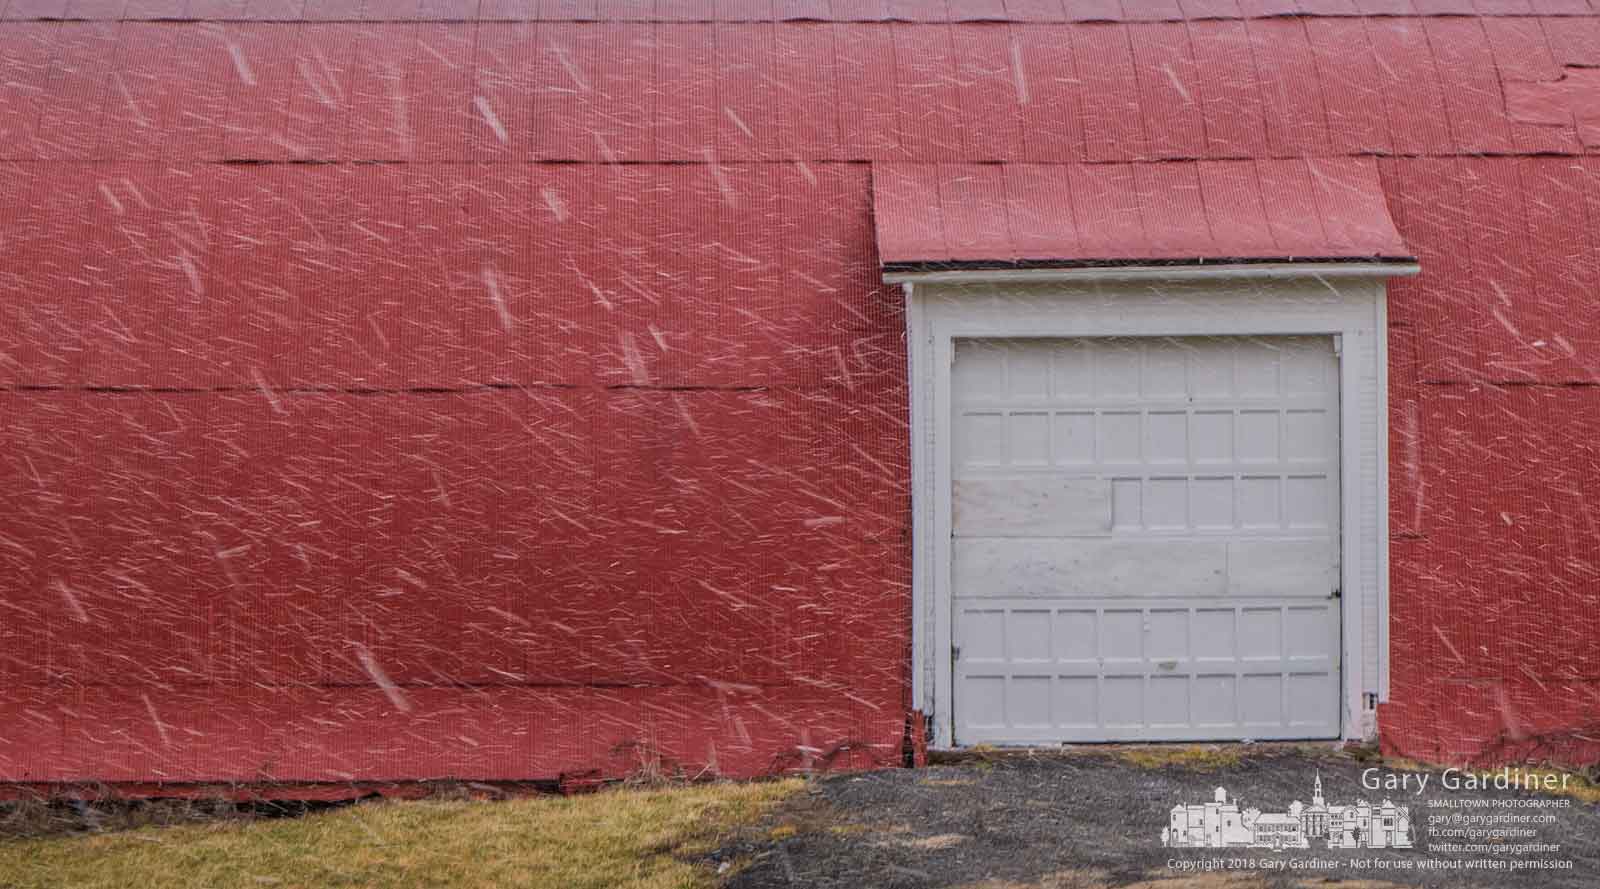 Eddys of snow from an afternoon squall fall across the entrance to the Braun Farm. My Final Photo for Jan. 29, 2018.